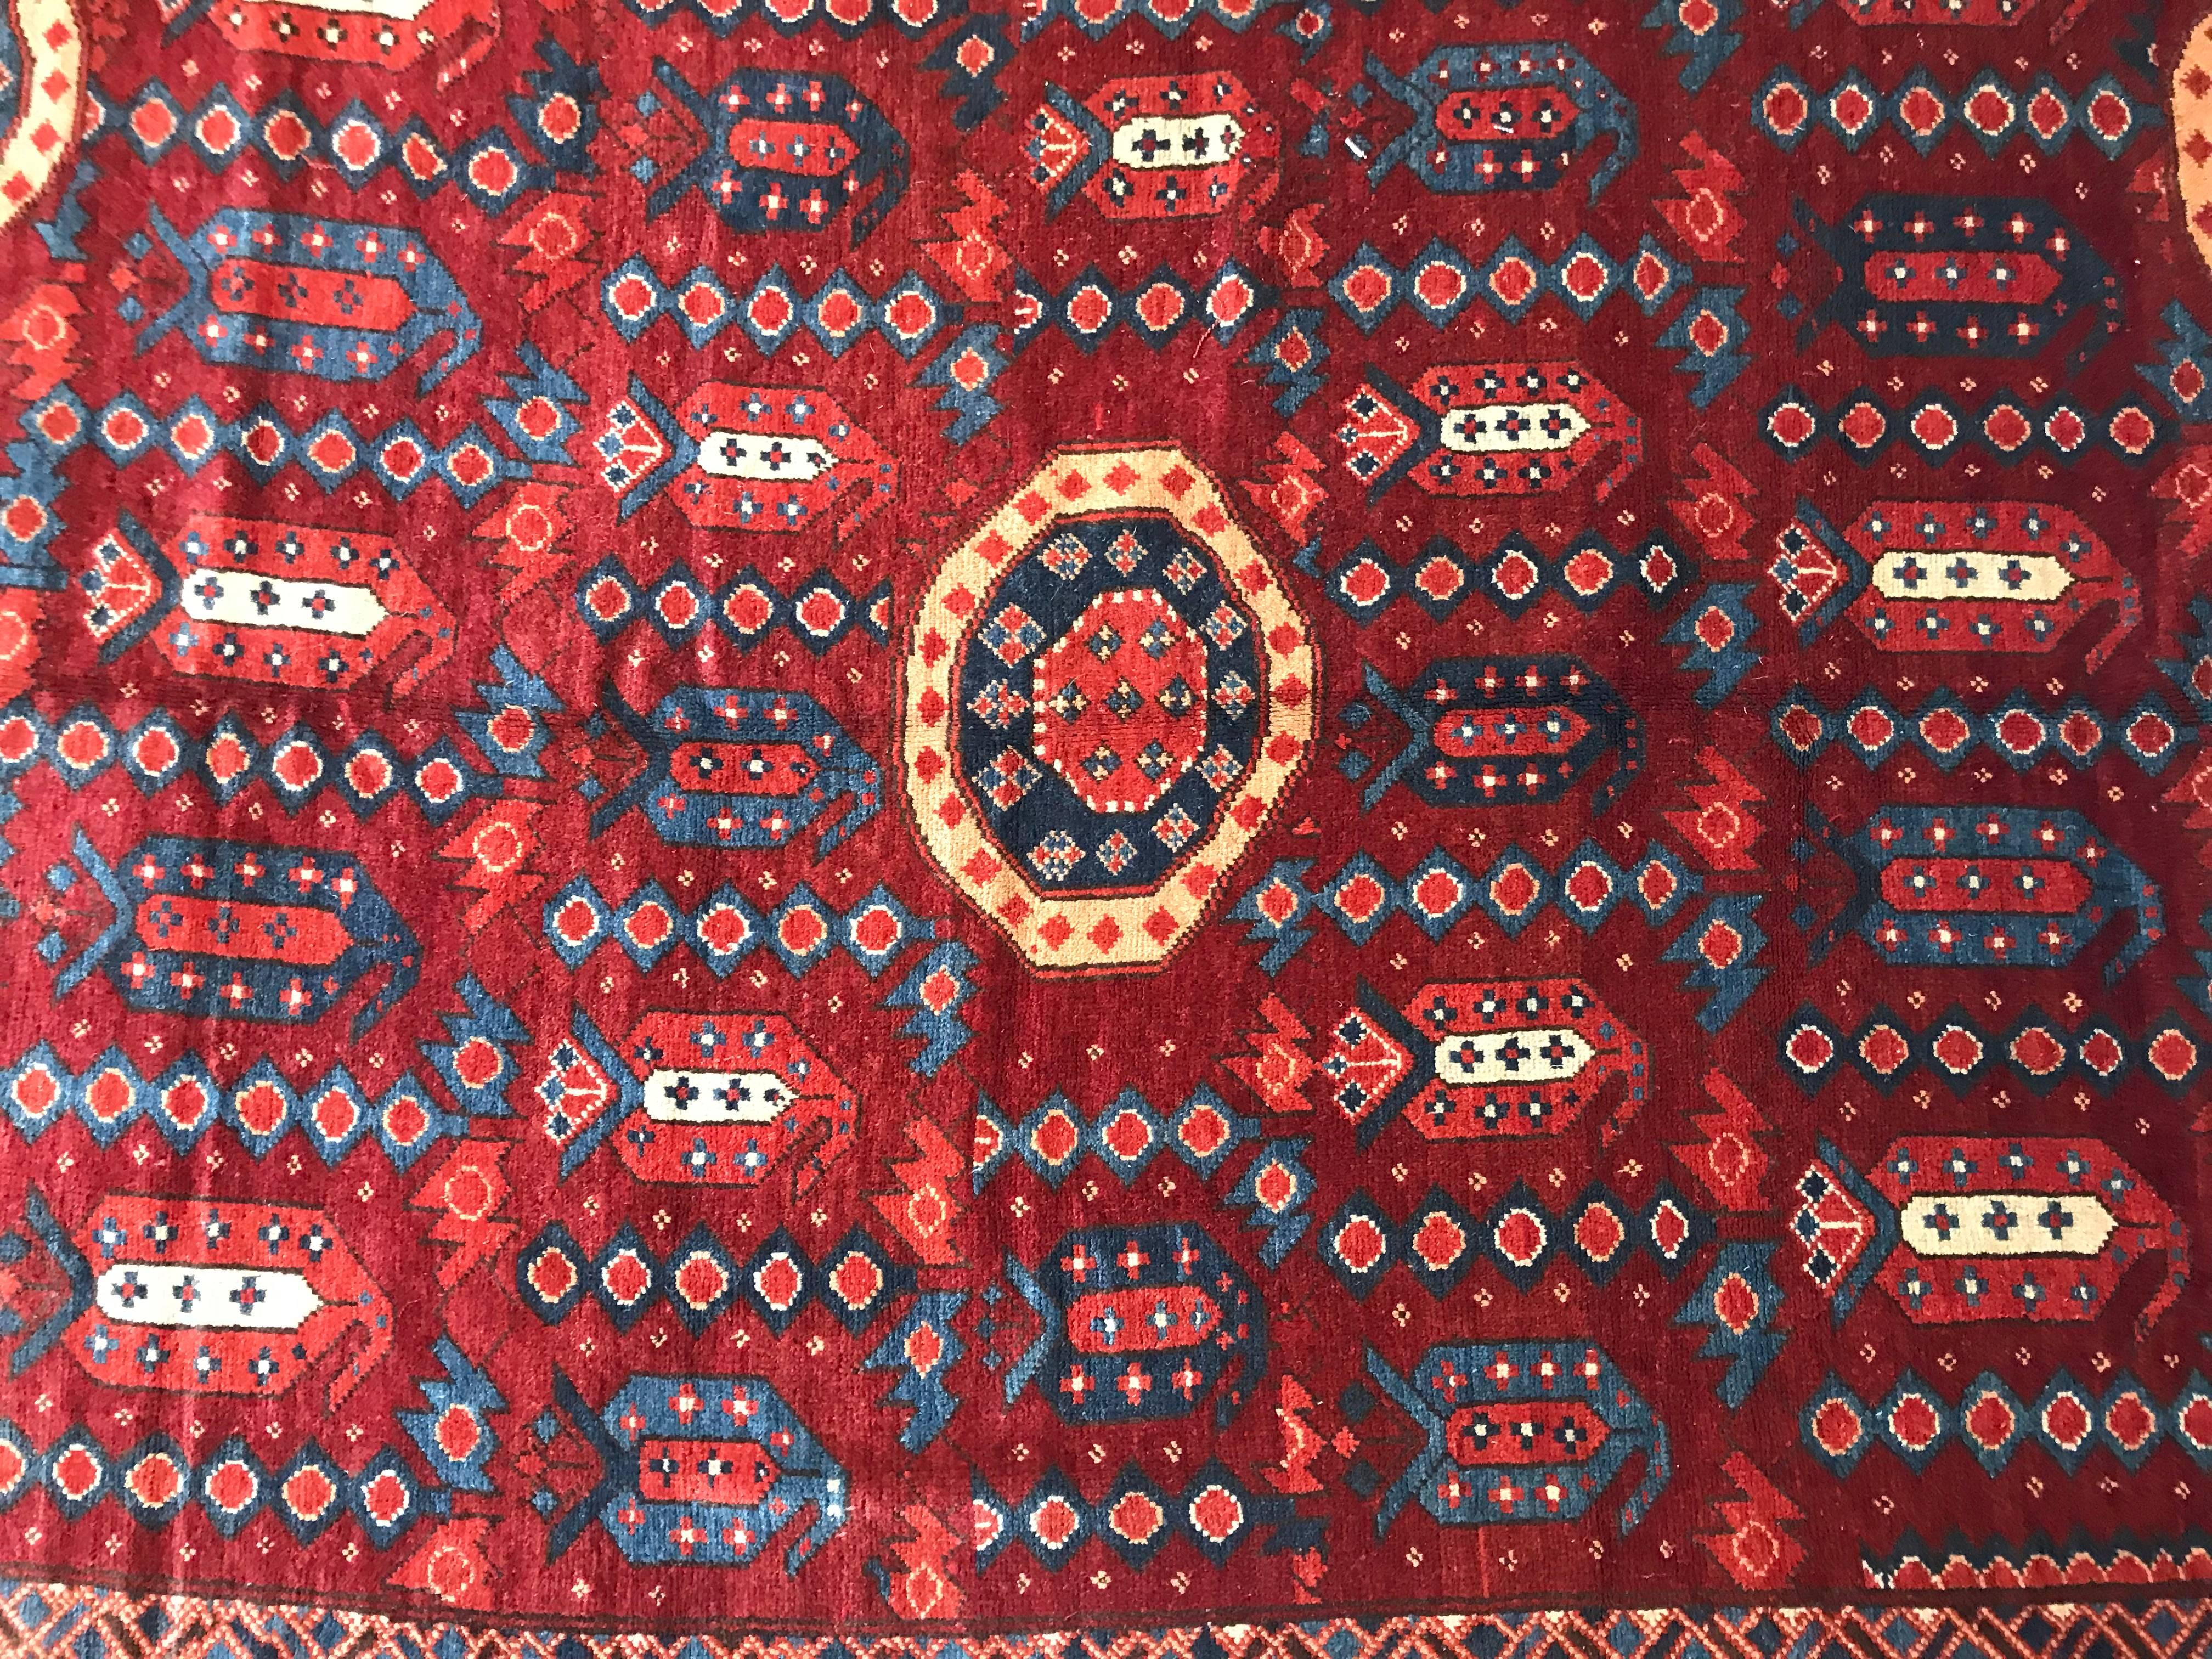 A contemporary Beshir carpet or rug. With wonderfully vibrant colors this room sized Beshir carpet is in very nice condition and has just been cleaned and hung.
This circa-1970s antique Beshir rug features an all-over design of geometric